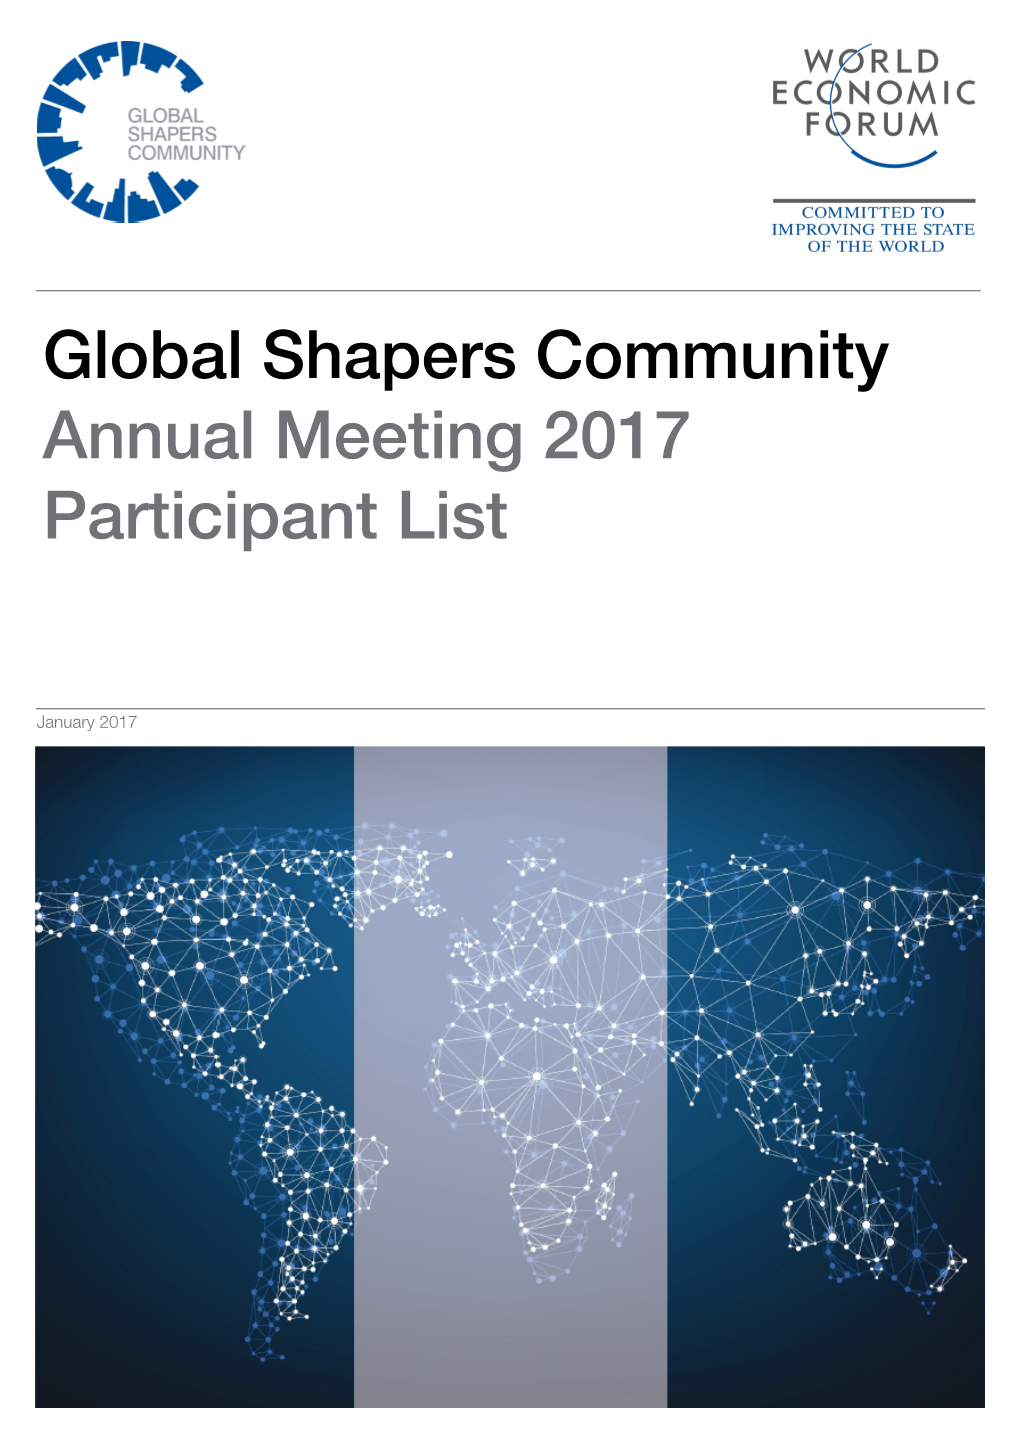 Global Shapers Community Annual Meeting 2017 Participant List